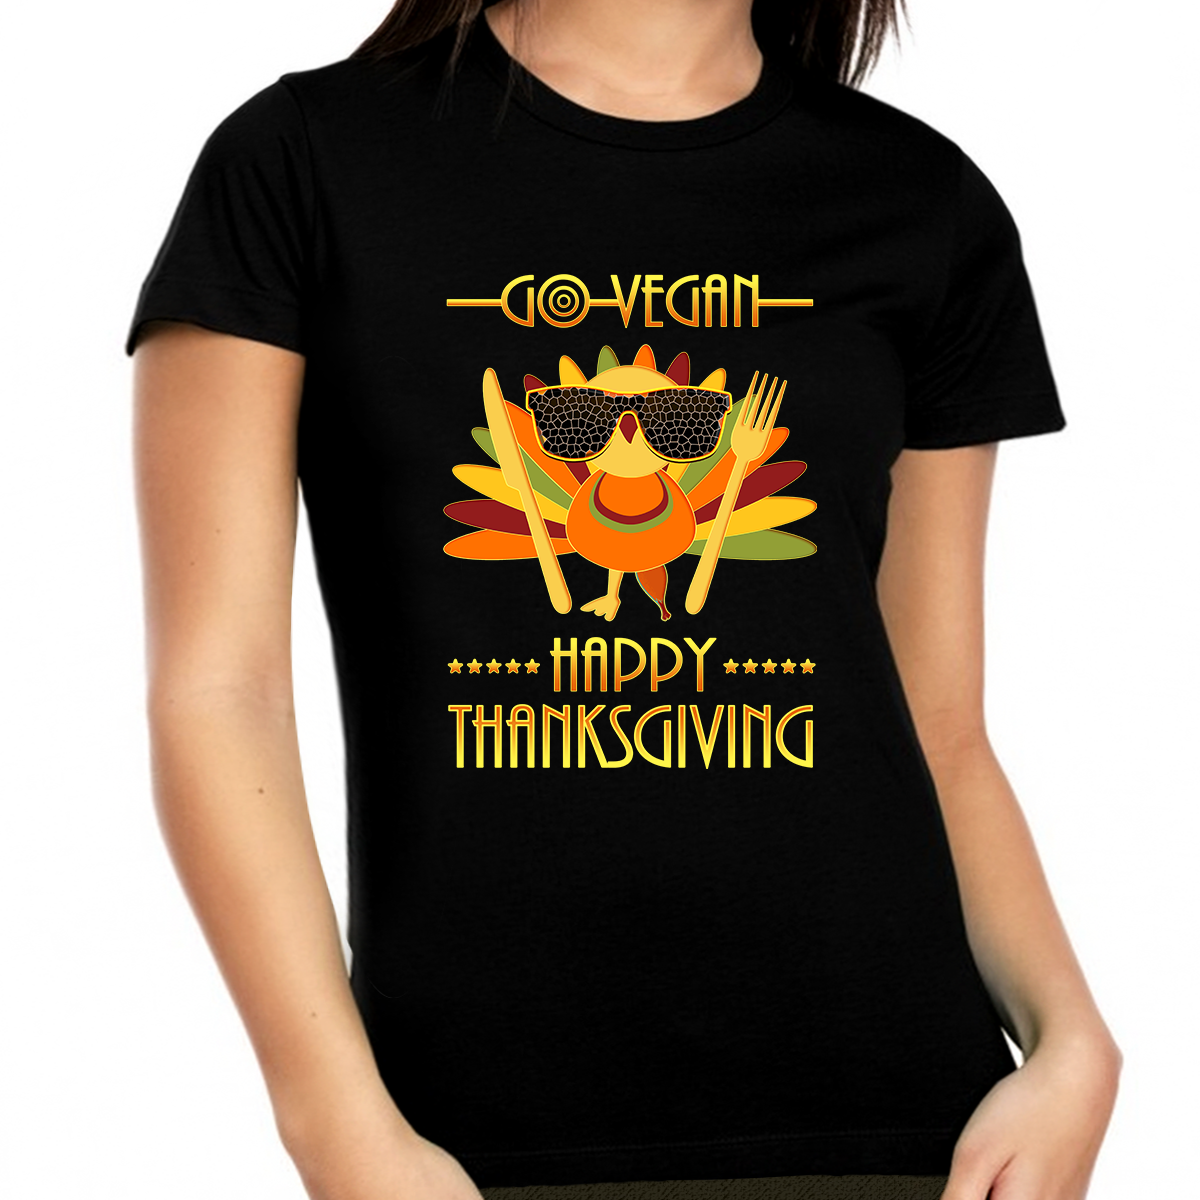 Funny Thanksgiving Shirts for Women Plus Size 1X 2X 3X 4X 5X Vegan Shirt Cute Thanksgiving Tops Fall Shirts